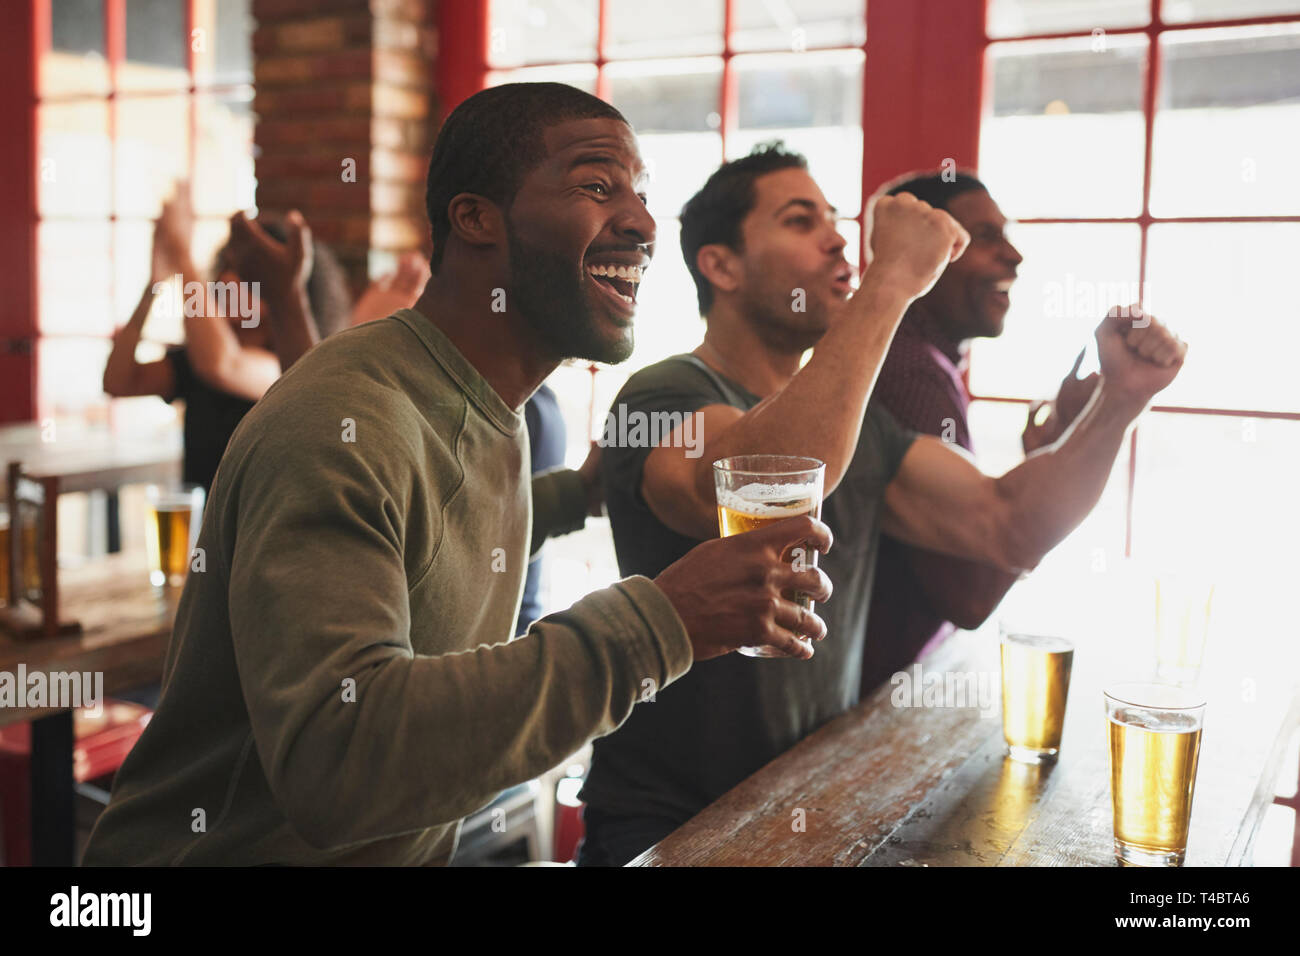 Group Of Male Friends Celebrating Whilst Watching Game On Screen In Sports Bar Stock Photo